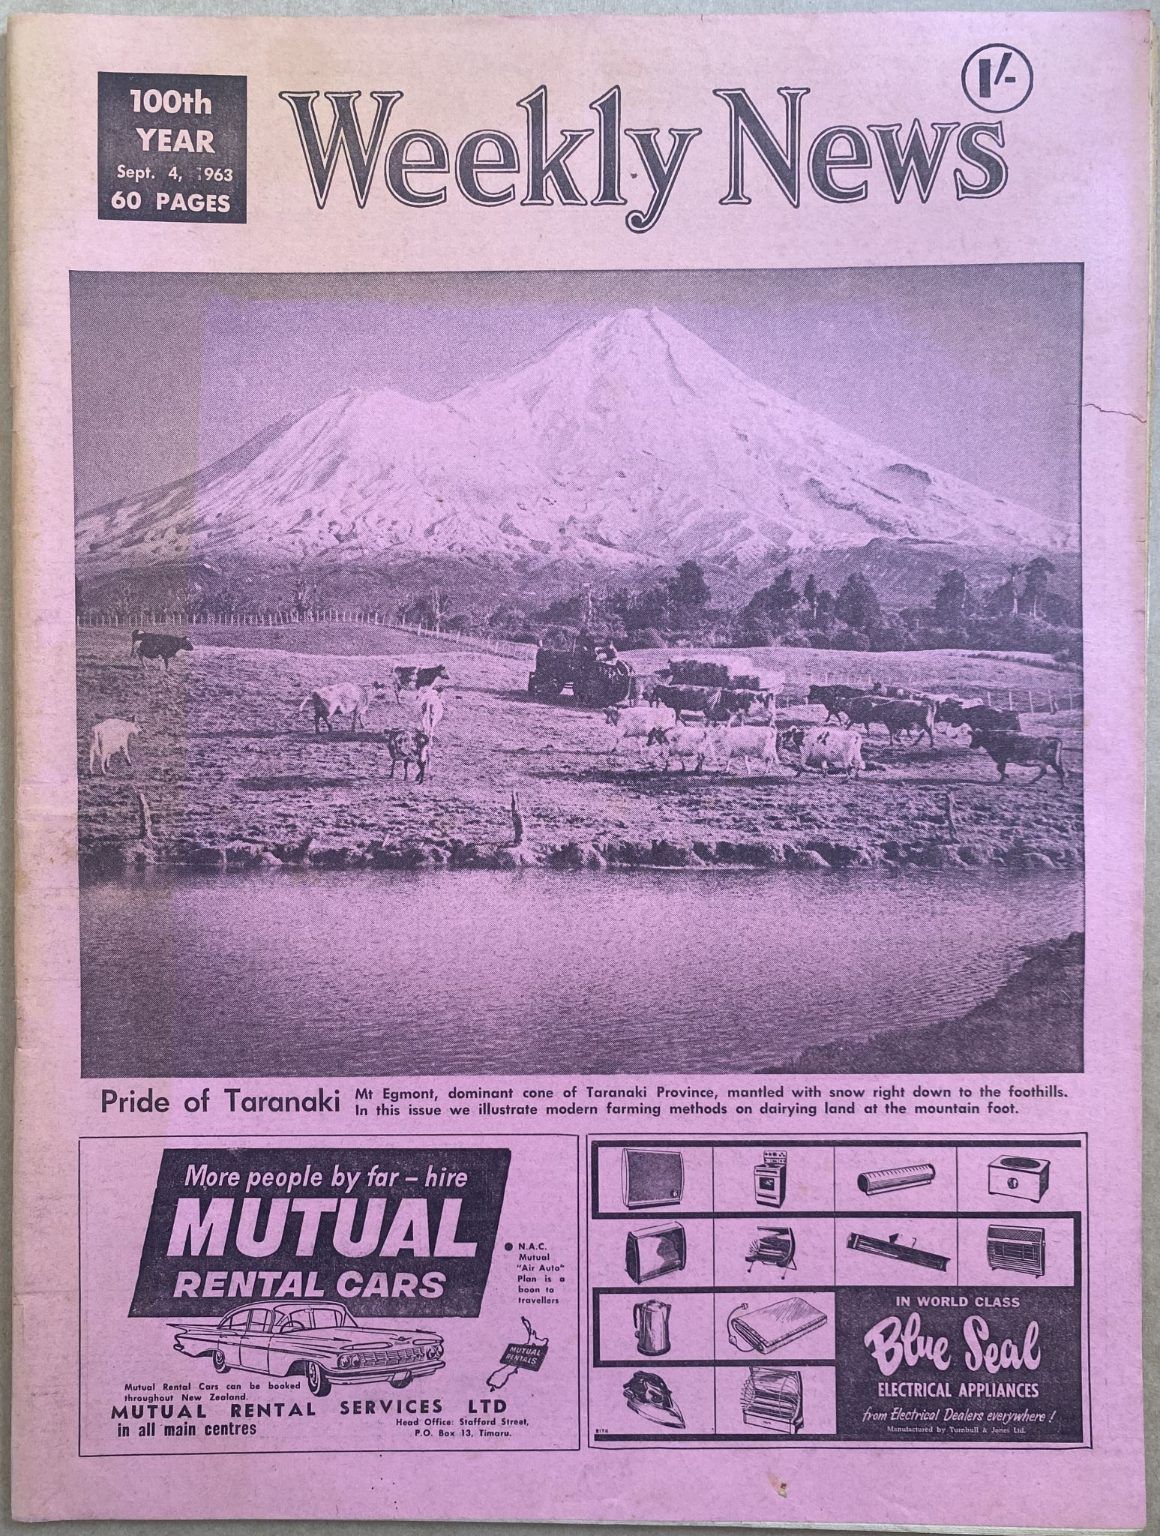 OLD NEWSPAPER: The Weekly News, No. 5206, 4 September 1963